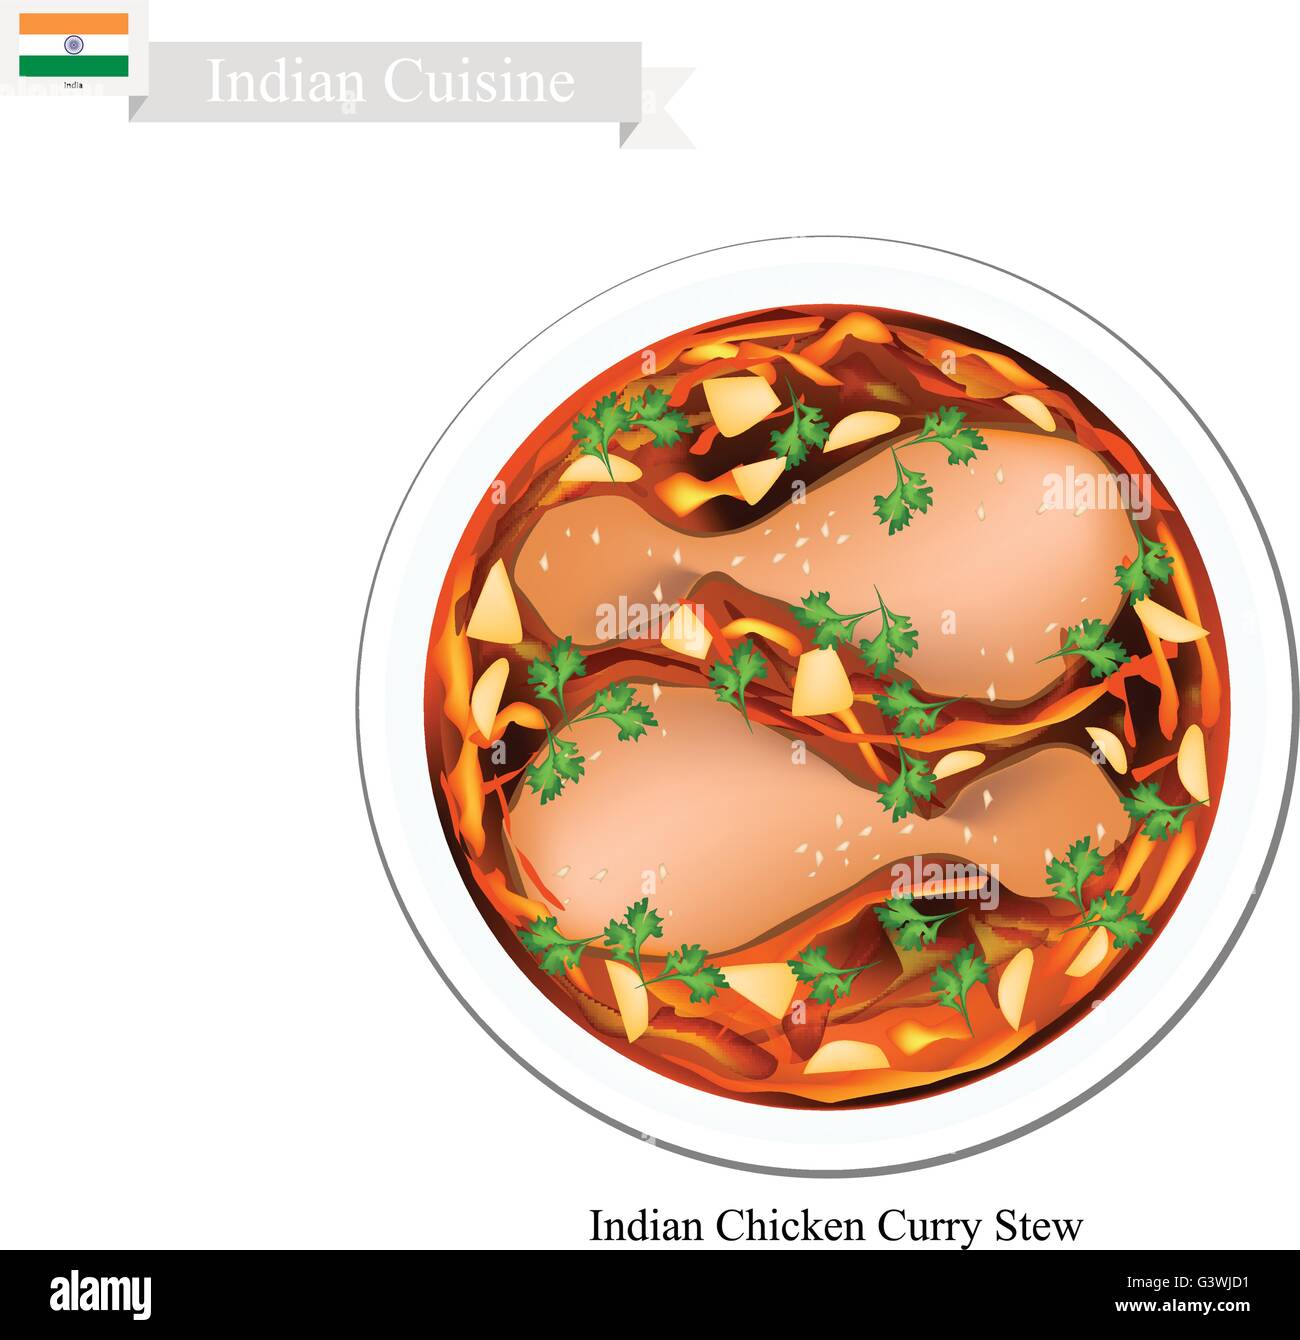 Indian Cuisine, Traditional Indian Chicken Curry Stew. One of The Most Popular Dish in India. Stock Vector